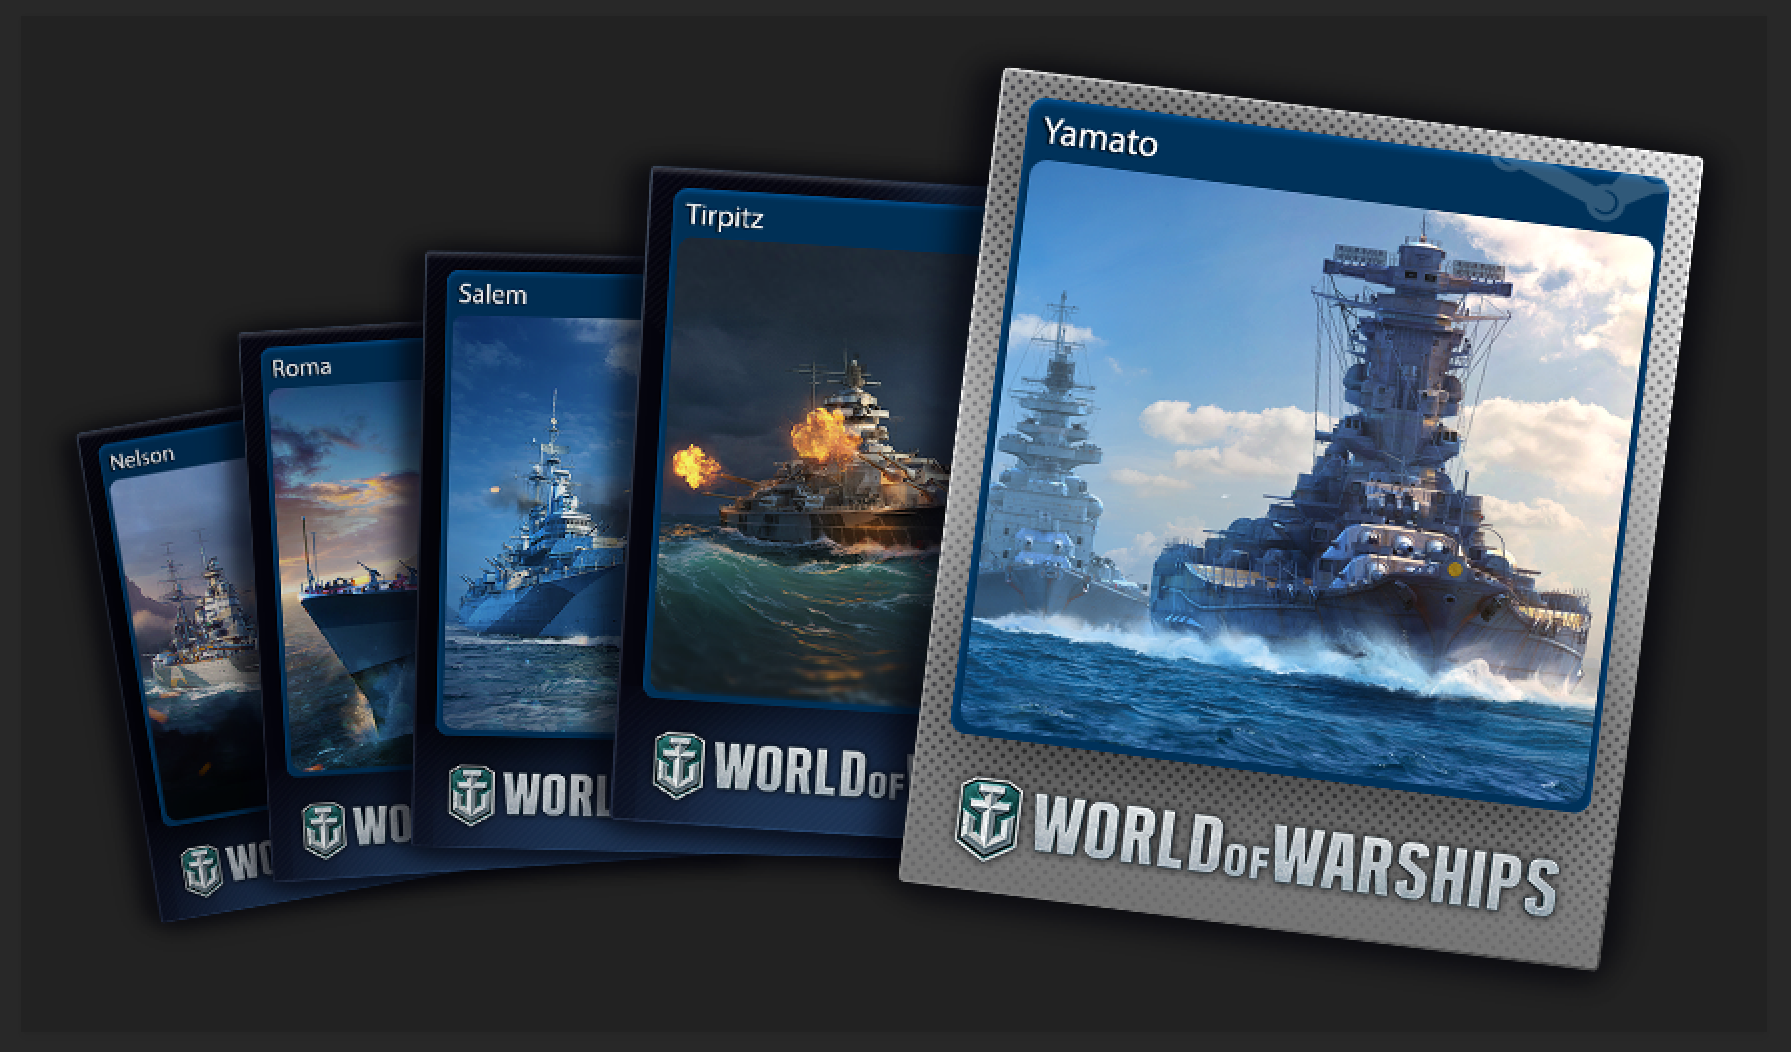 world of warships steam login with wargaming